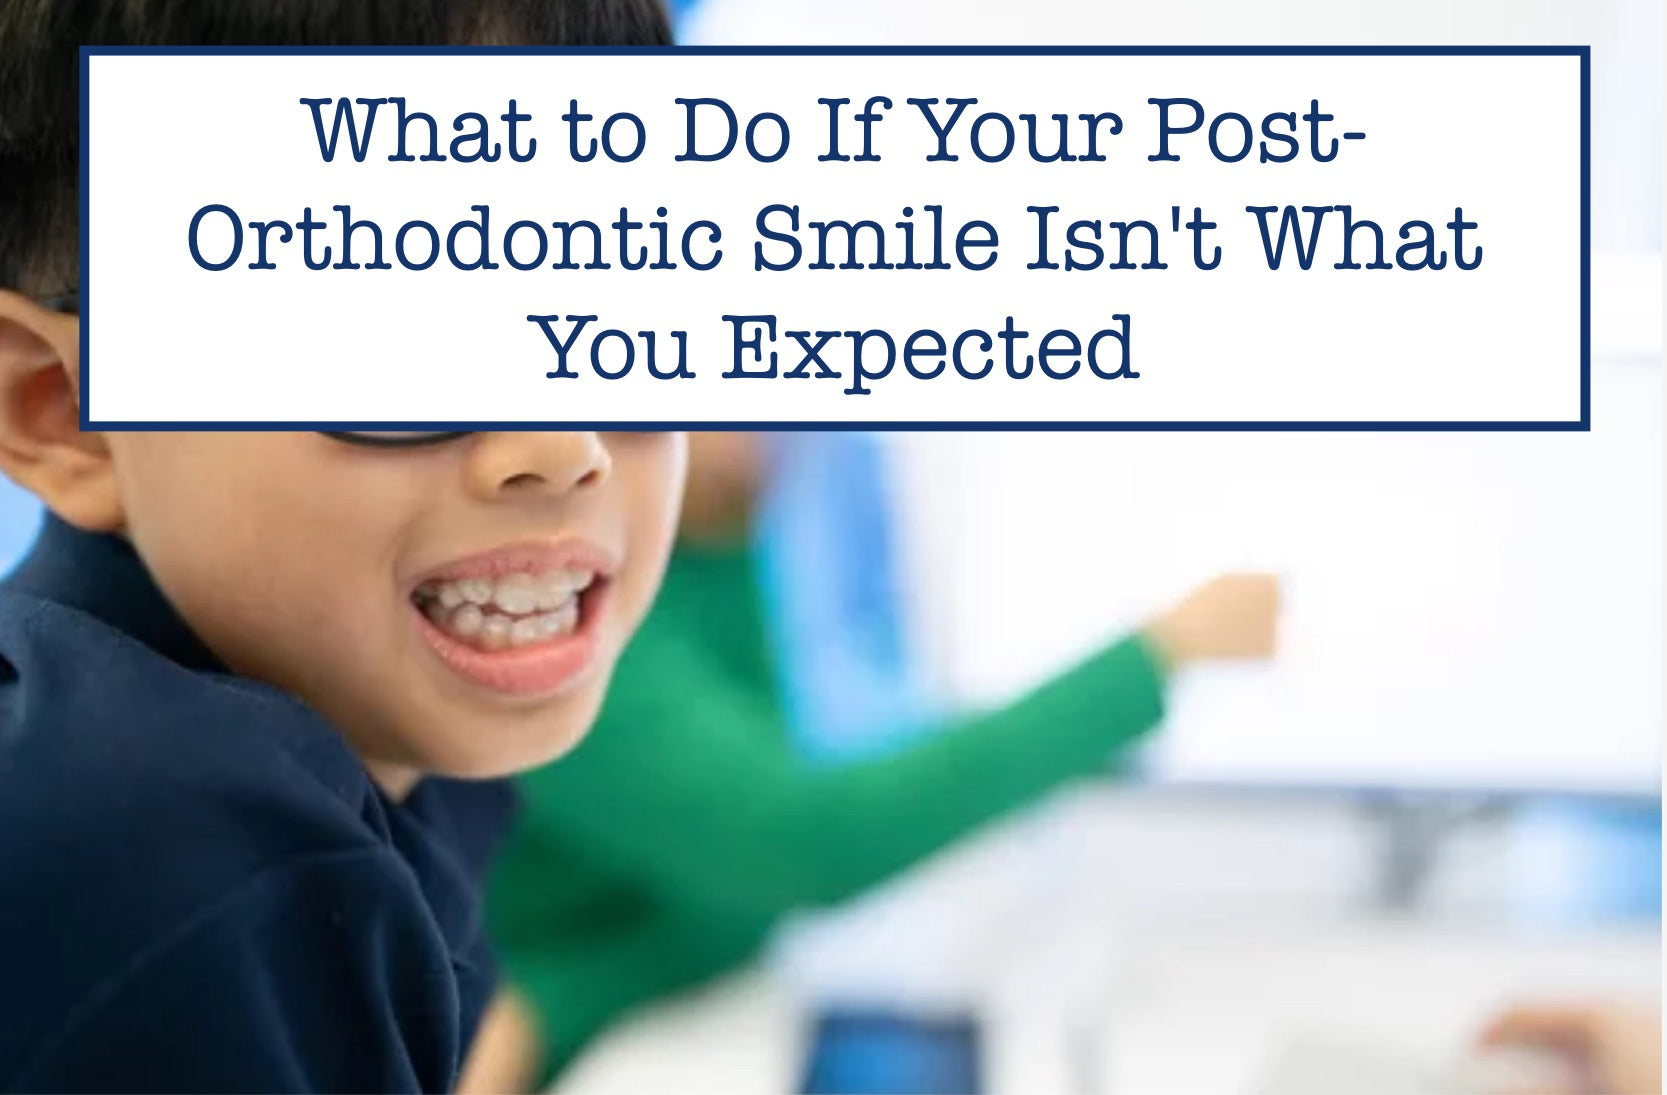 What to Do If Your Post-Orthodontic Smile Isn't What You Expected